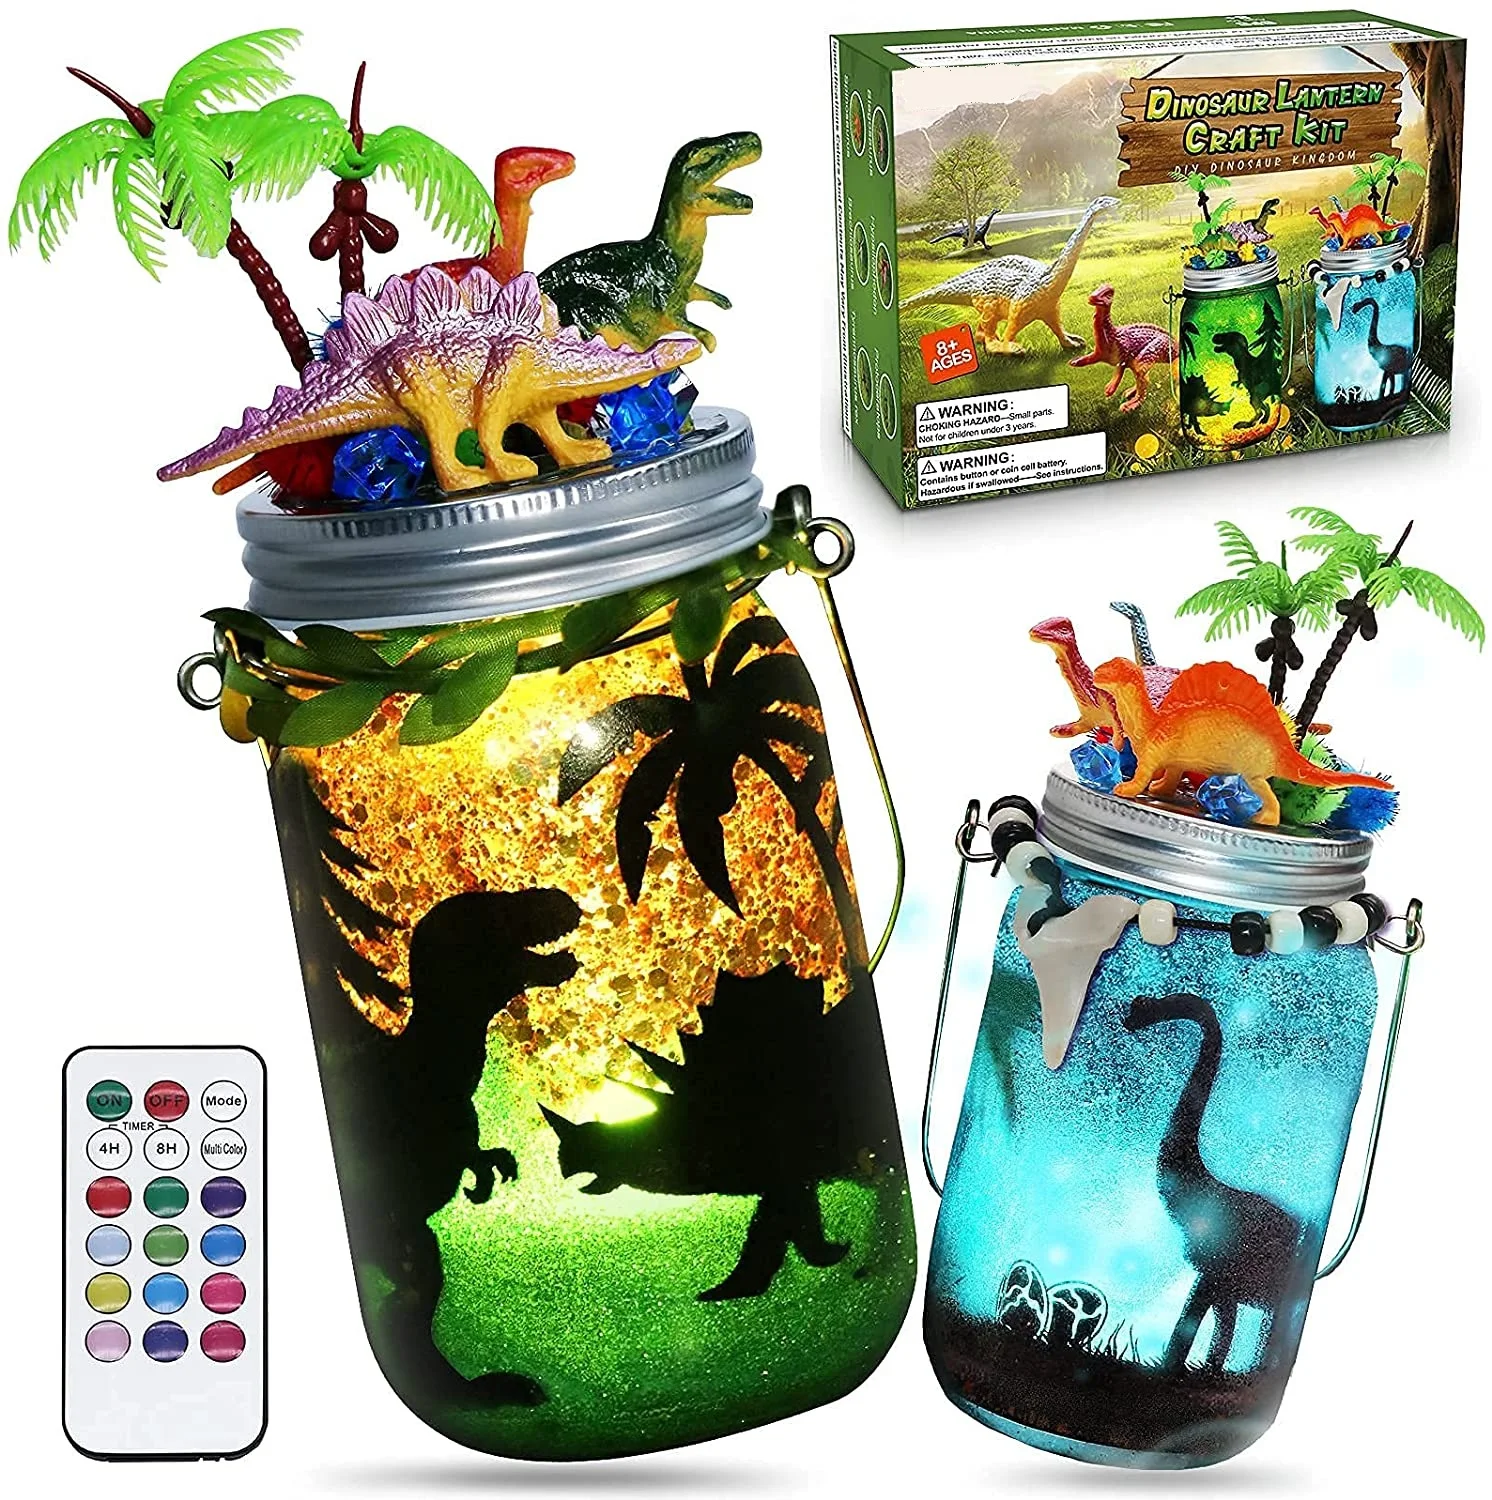 Alritz DIY Dinosaur Lantern Crafts Kits with 6 Mini Realistic Dinosaur Dinosaur Toys Arts and Crafts Night Light Project Gifts for Kids Boys Girls Ages 4 5 6 7 8 9 10 Create a Dino World 